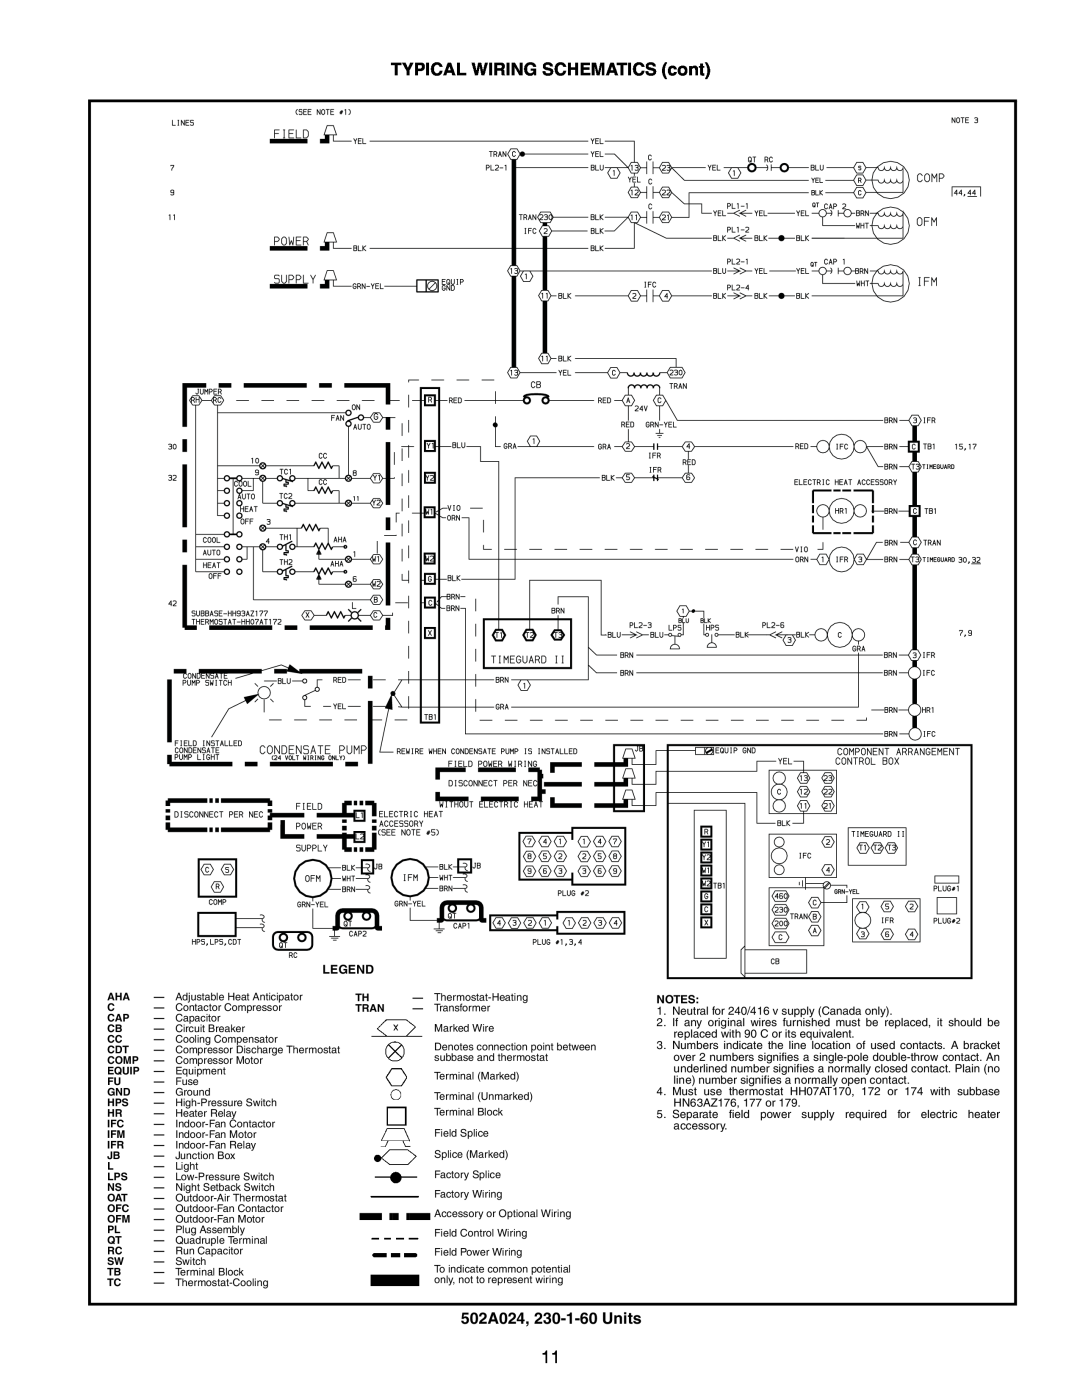 Bryant manual TYPICAL WIRING SCHEMATICS cont, 502A024, 230-1-60Units 